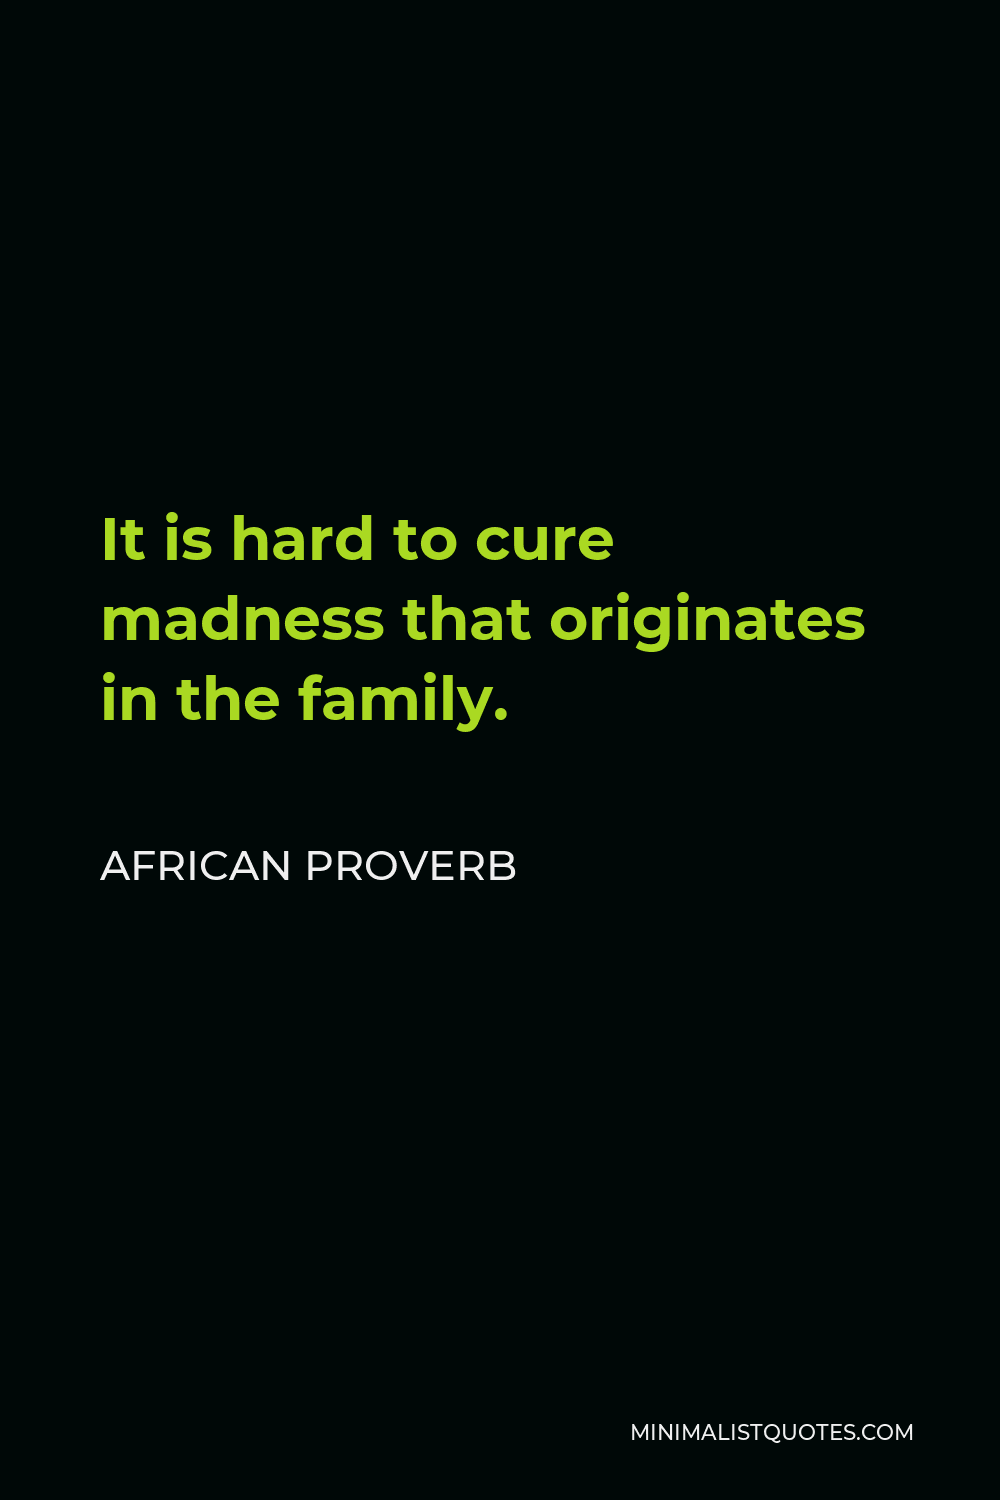 African Proverb Quote - It is hard to cure madness that originates in the family.